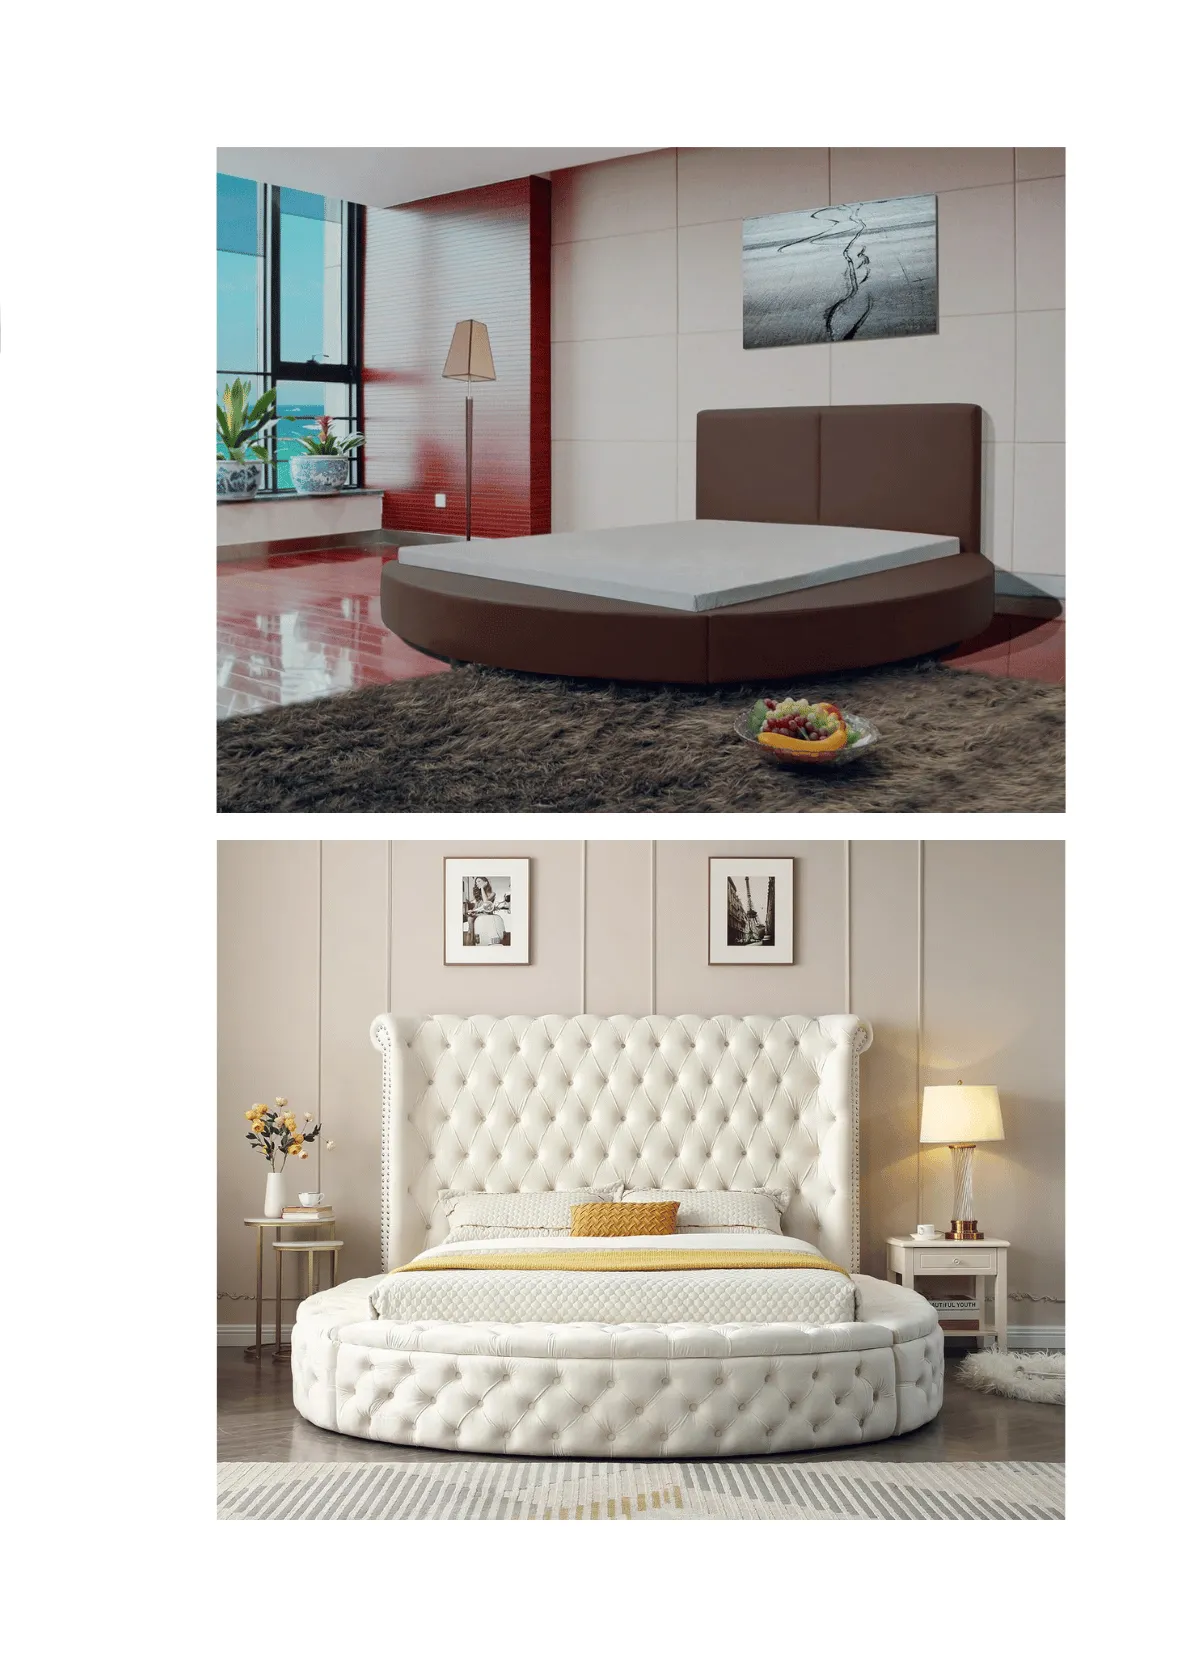 "Round Bed Review | Top Picks to Embellish Your Bedroom"